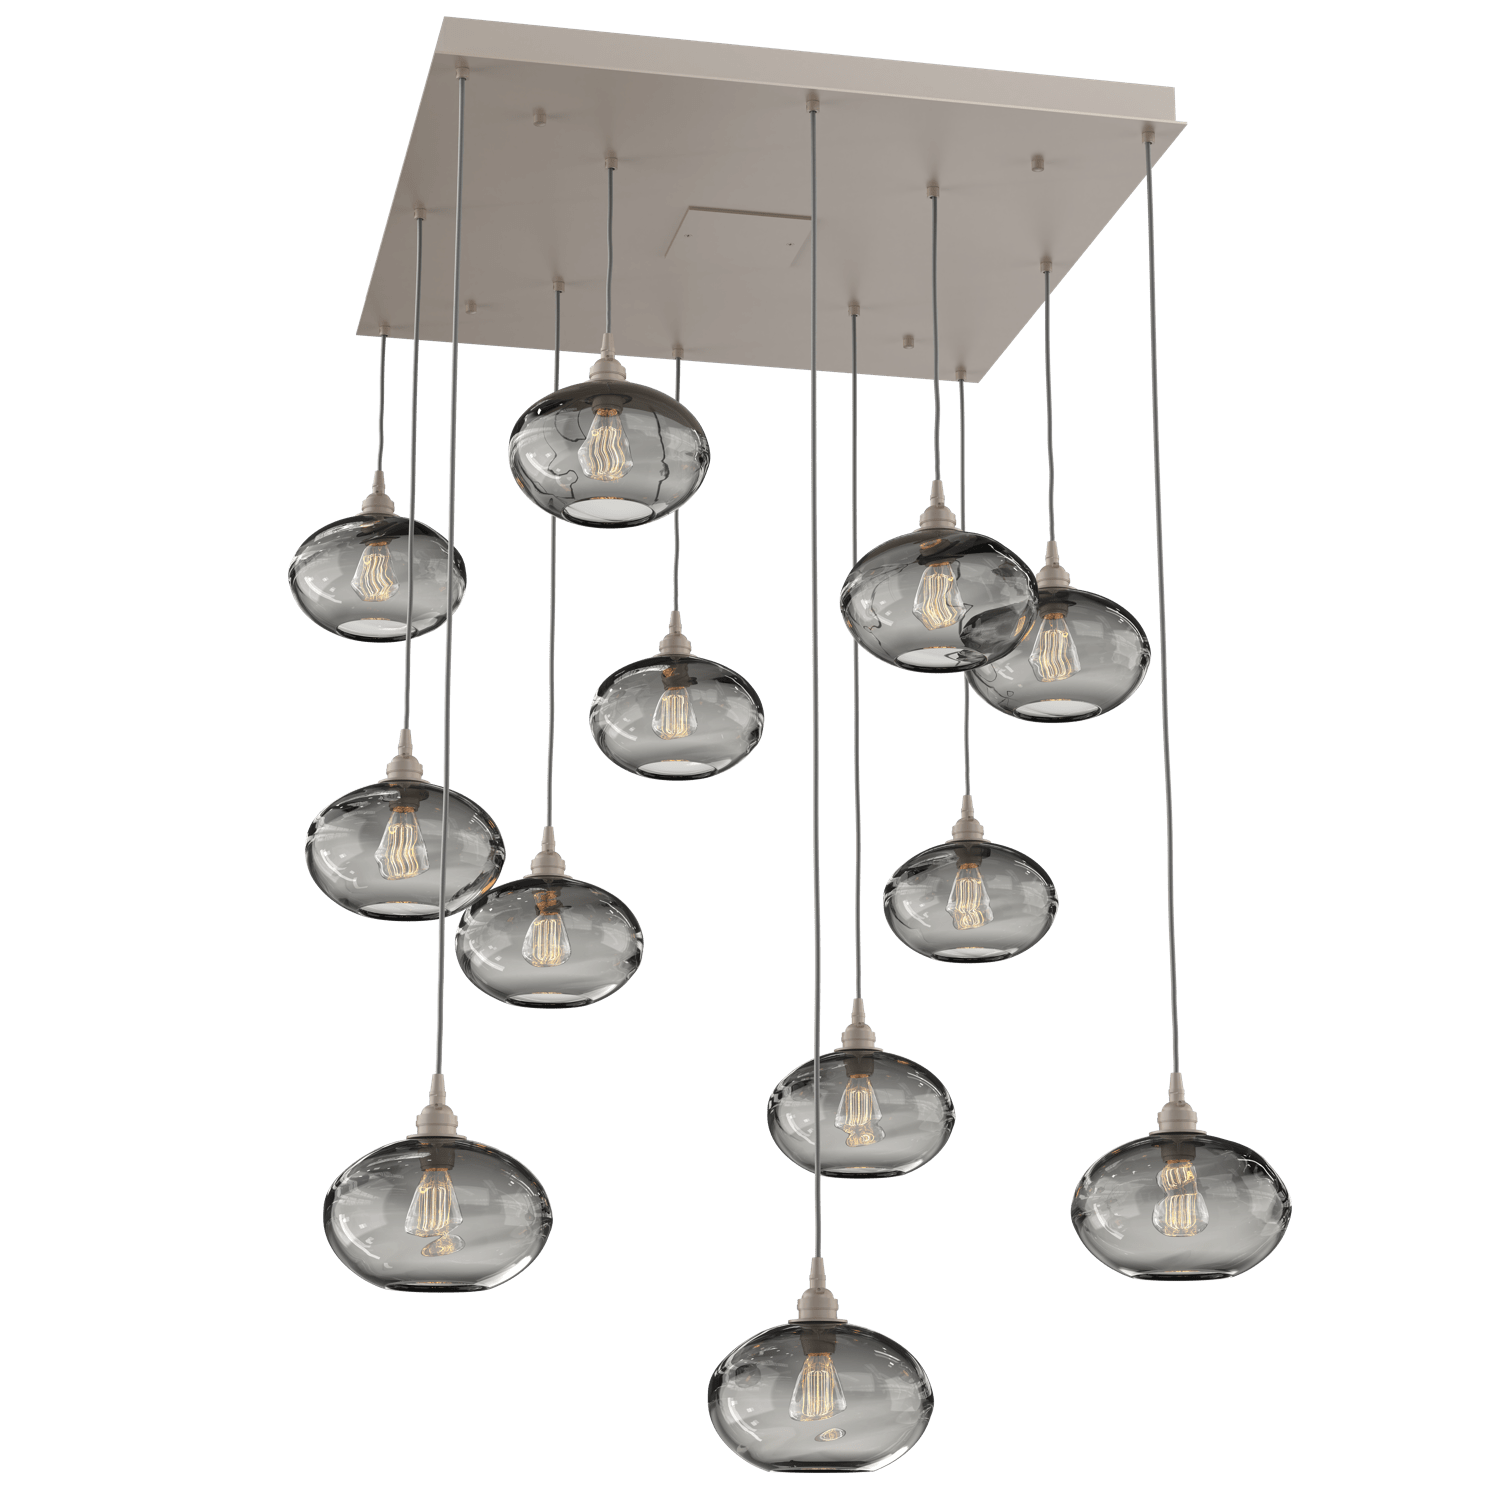 CHB0036-12-BS-OS-Hammerton-Studio-Optic-Blown-Glass-Coppa-12-light-square-pendant-chandelier-with-metallic-beige-silver-finish-and-optic-smoke-blown-glass-shades-and-incandescent-lamping